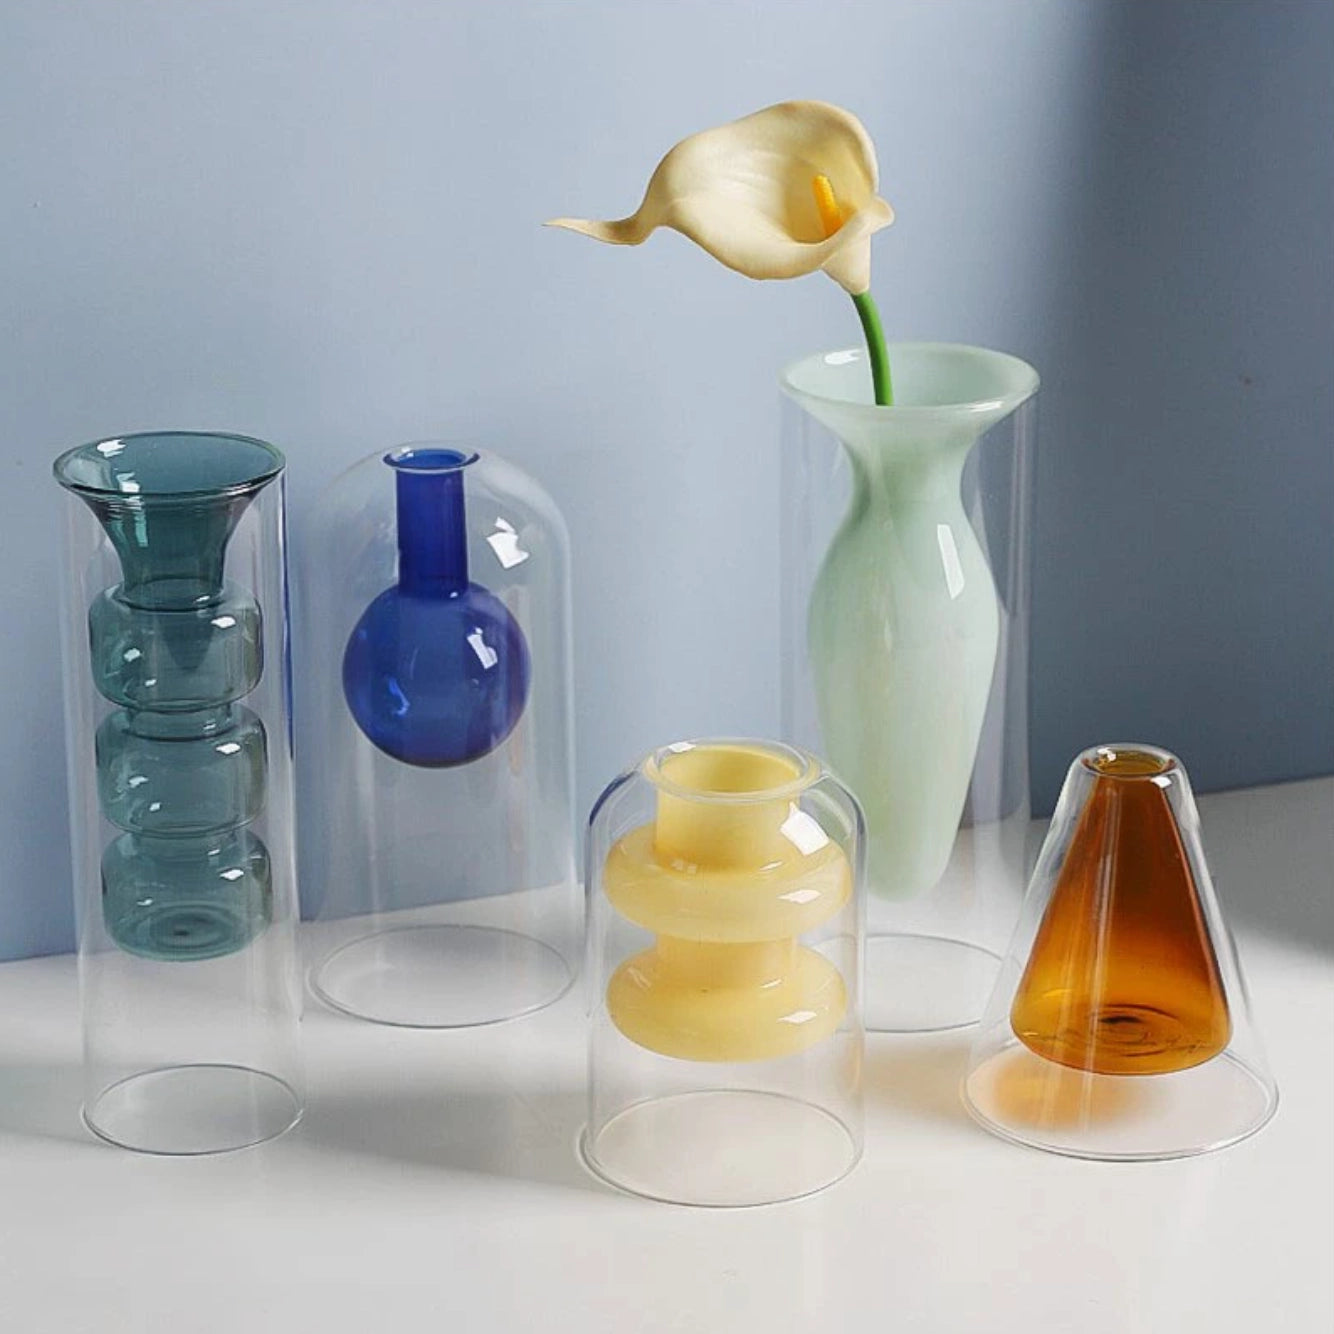 Nordic glass vase collection in transparent and opaque colors and various two-layer geometric shapes, with a colored layer hidden below smooth clear glass